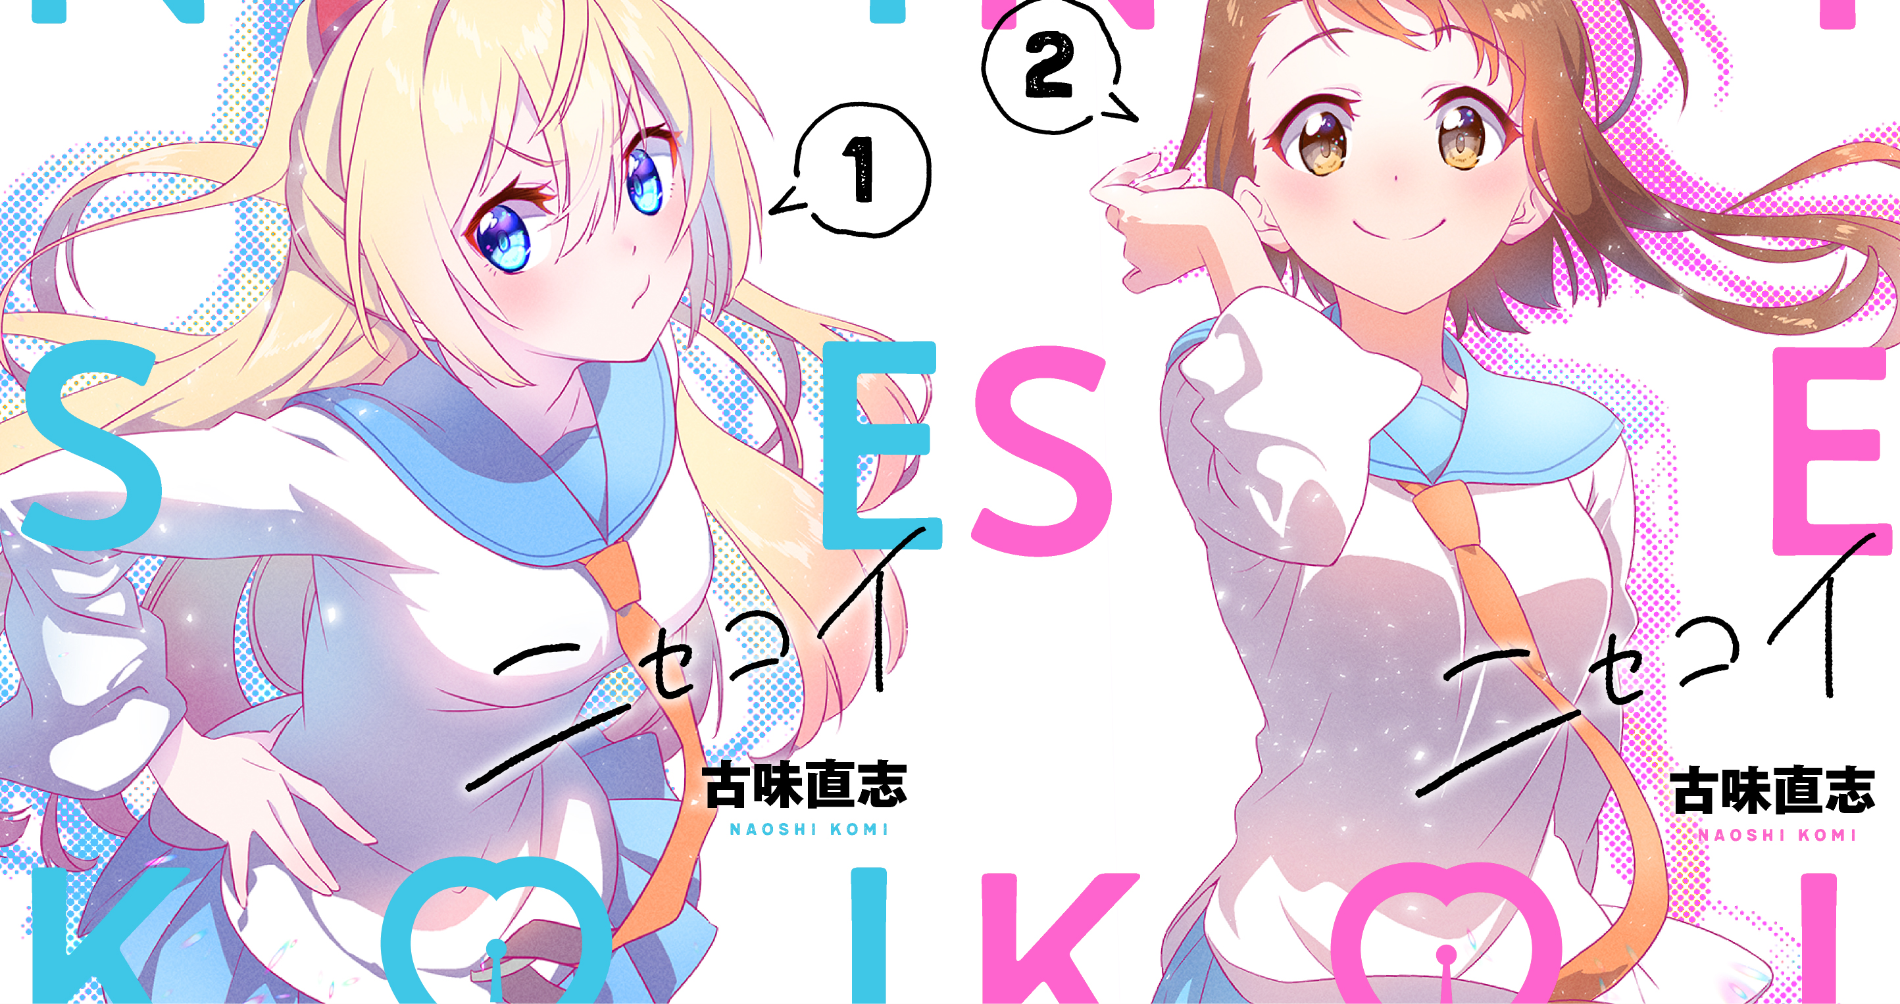 Nisekoi Gets Reprint With New Covers and Epilogue Story - Anime Corner